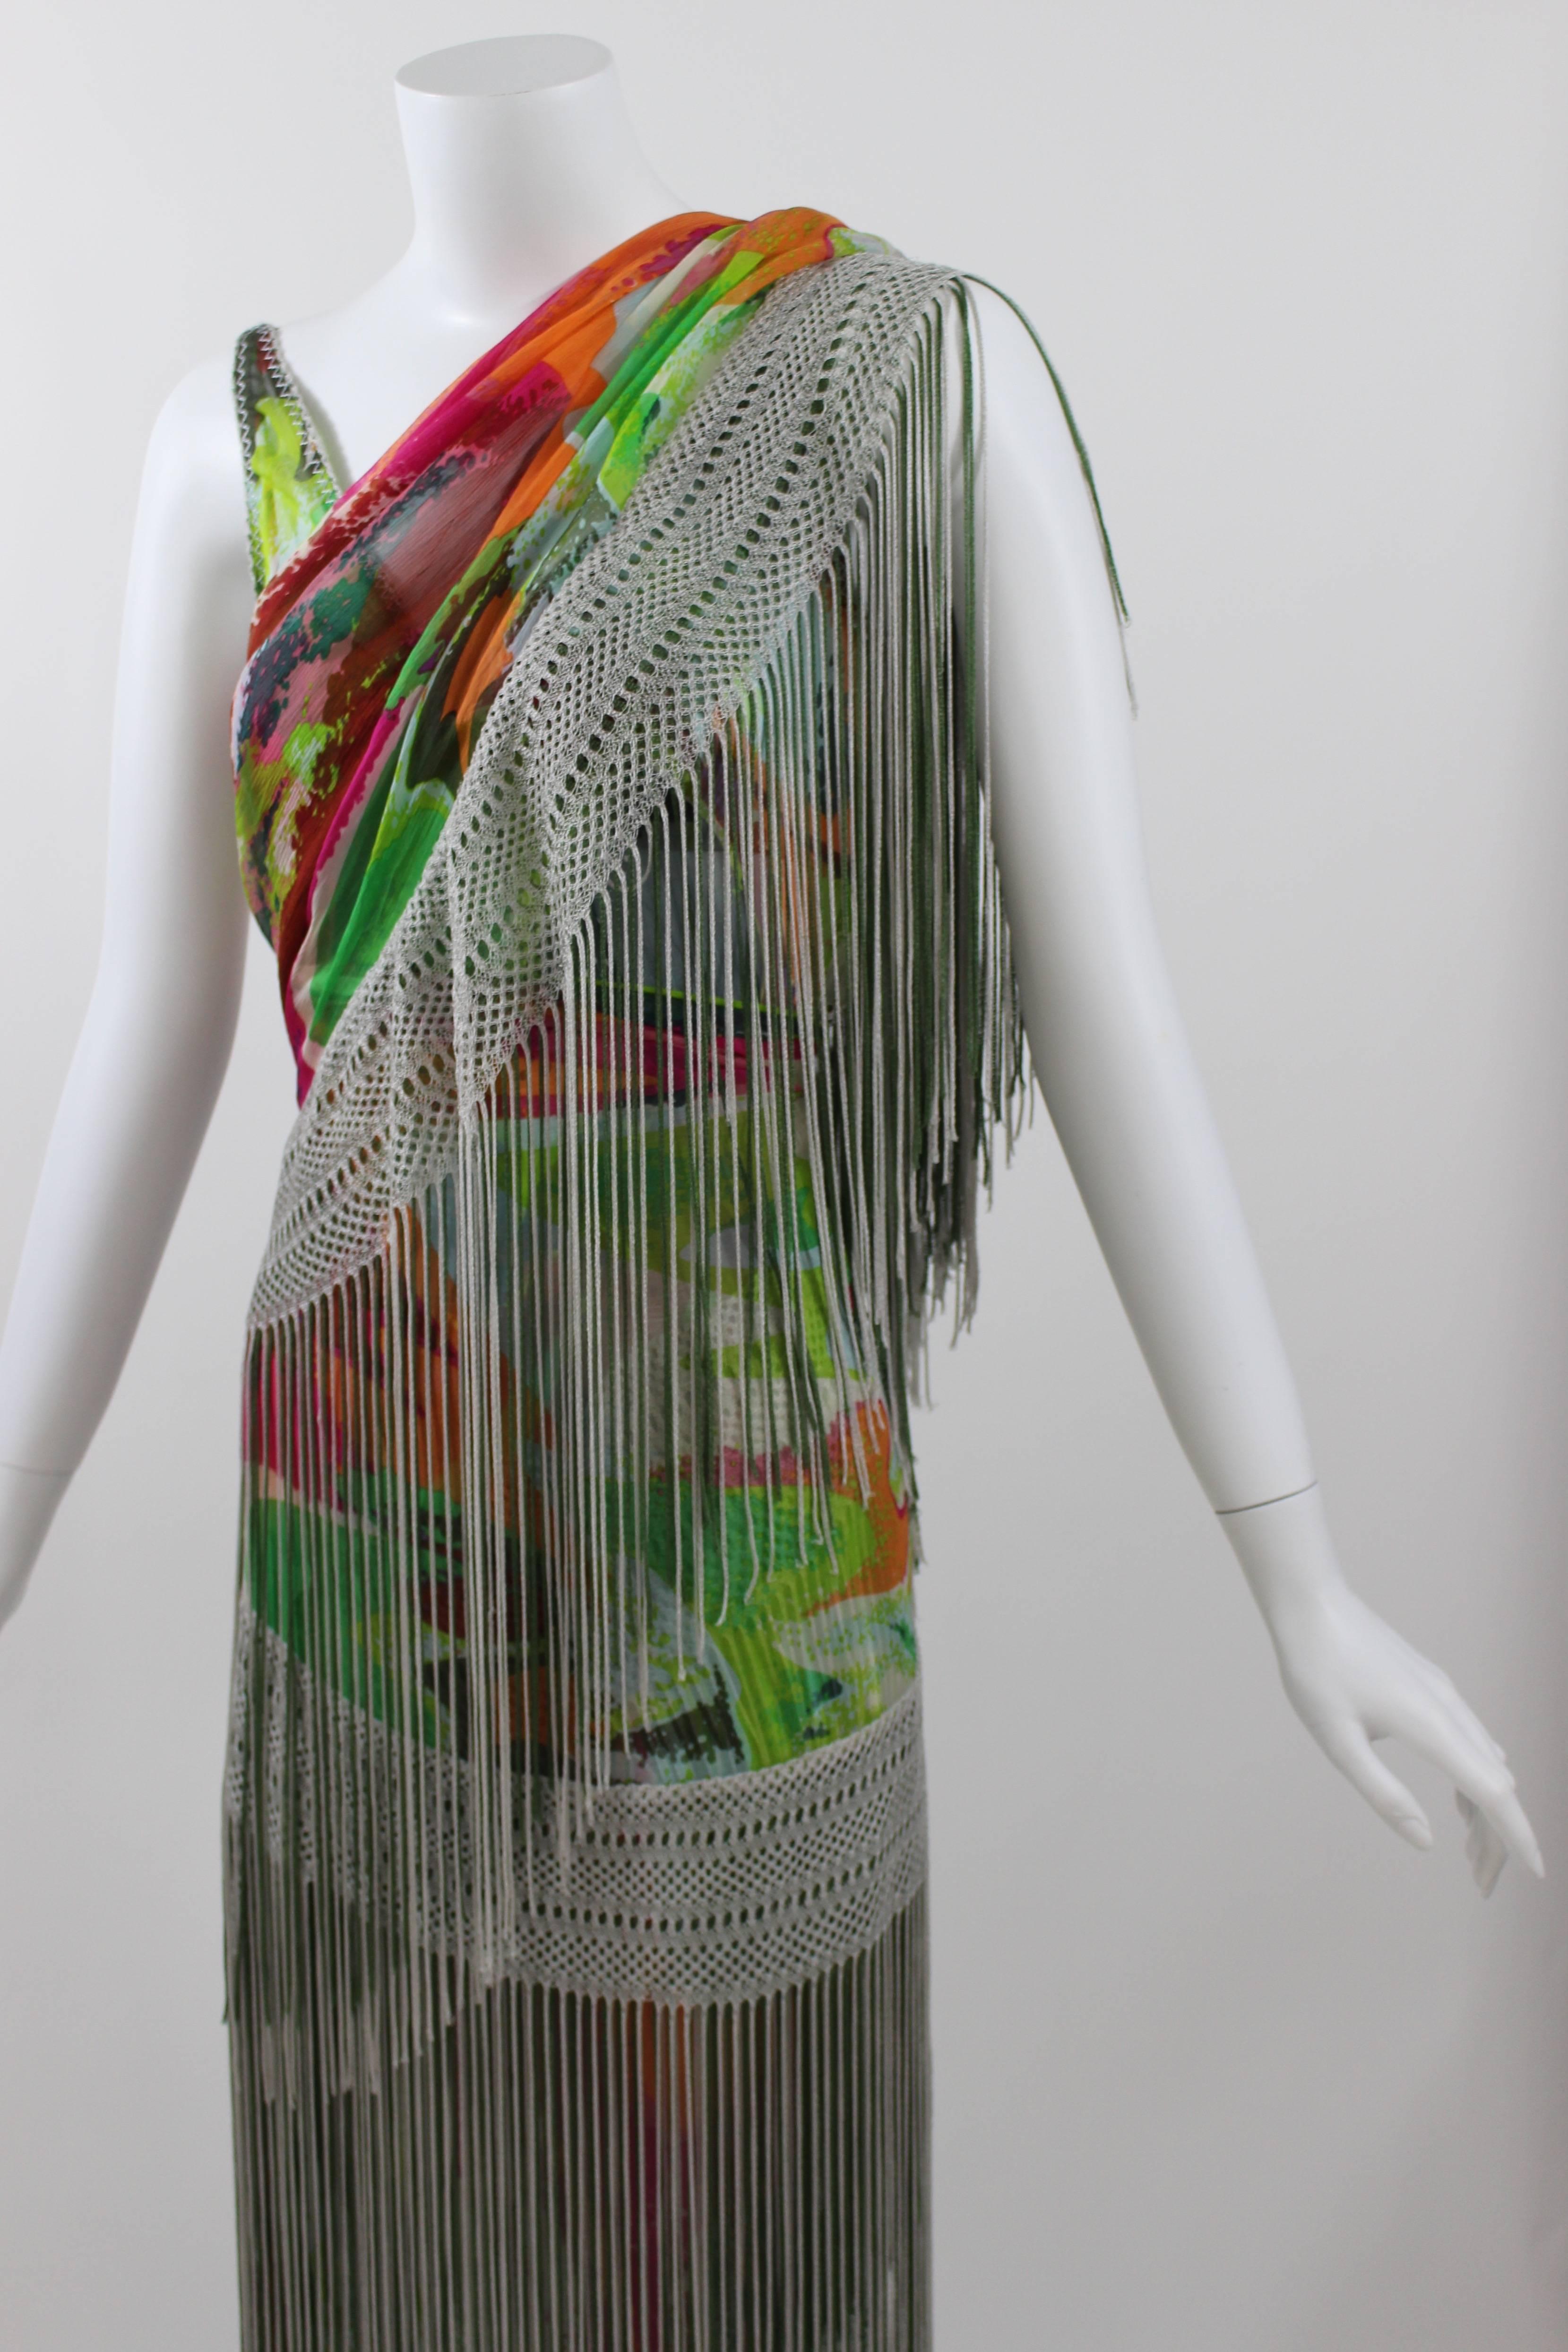 Missoni Runway 2004 Silk Colorful Fringe Scarf / Cape Dress In Excellent Condition For Sale In Boca Raton, FL